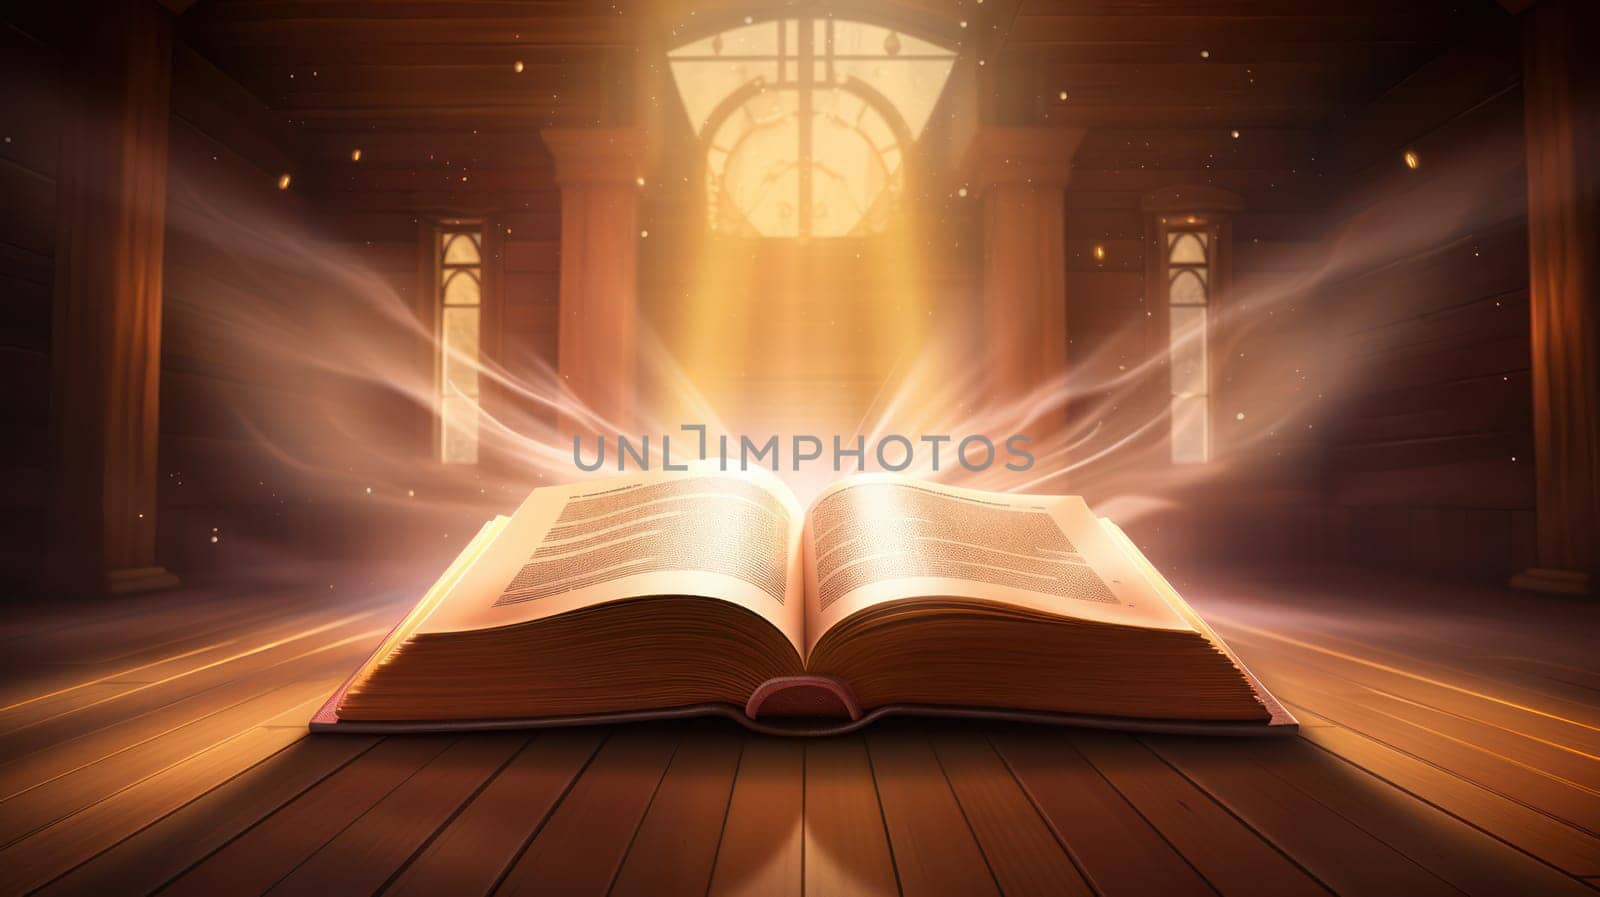 Enlightened Pages: A Magical Journey through Ancient Wisdom by Vichizh